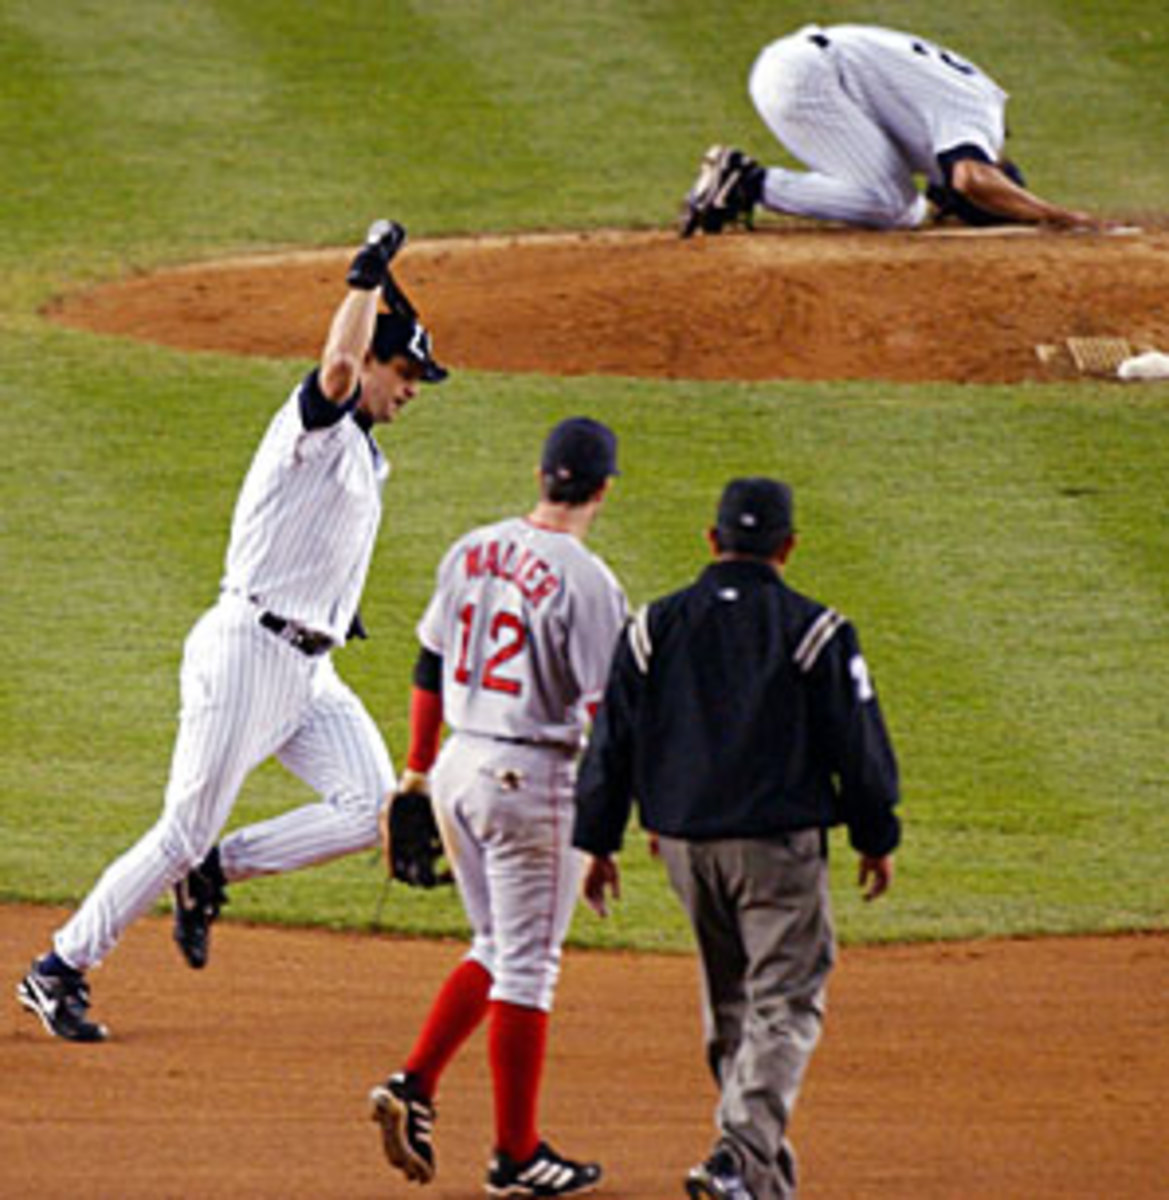 Rivera ran to the mound and collapsed in tears after Aaron Boone's home run beat the Red Sox in the 2003 ALCS. (Bill Kostroun/AP)